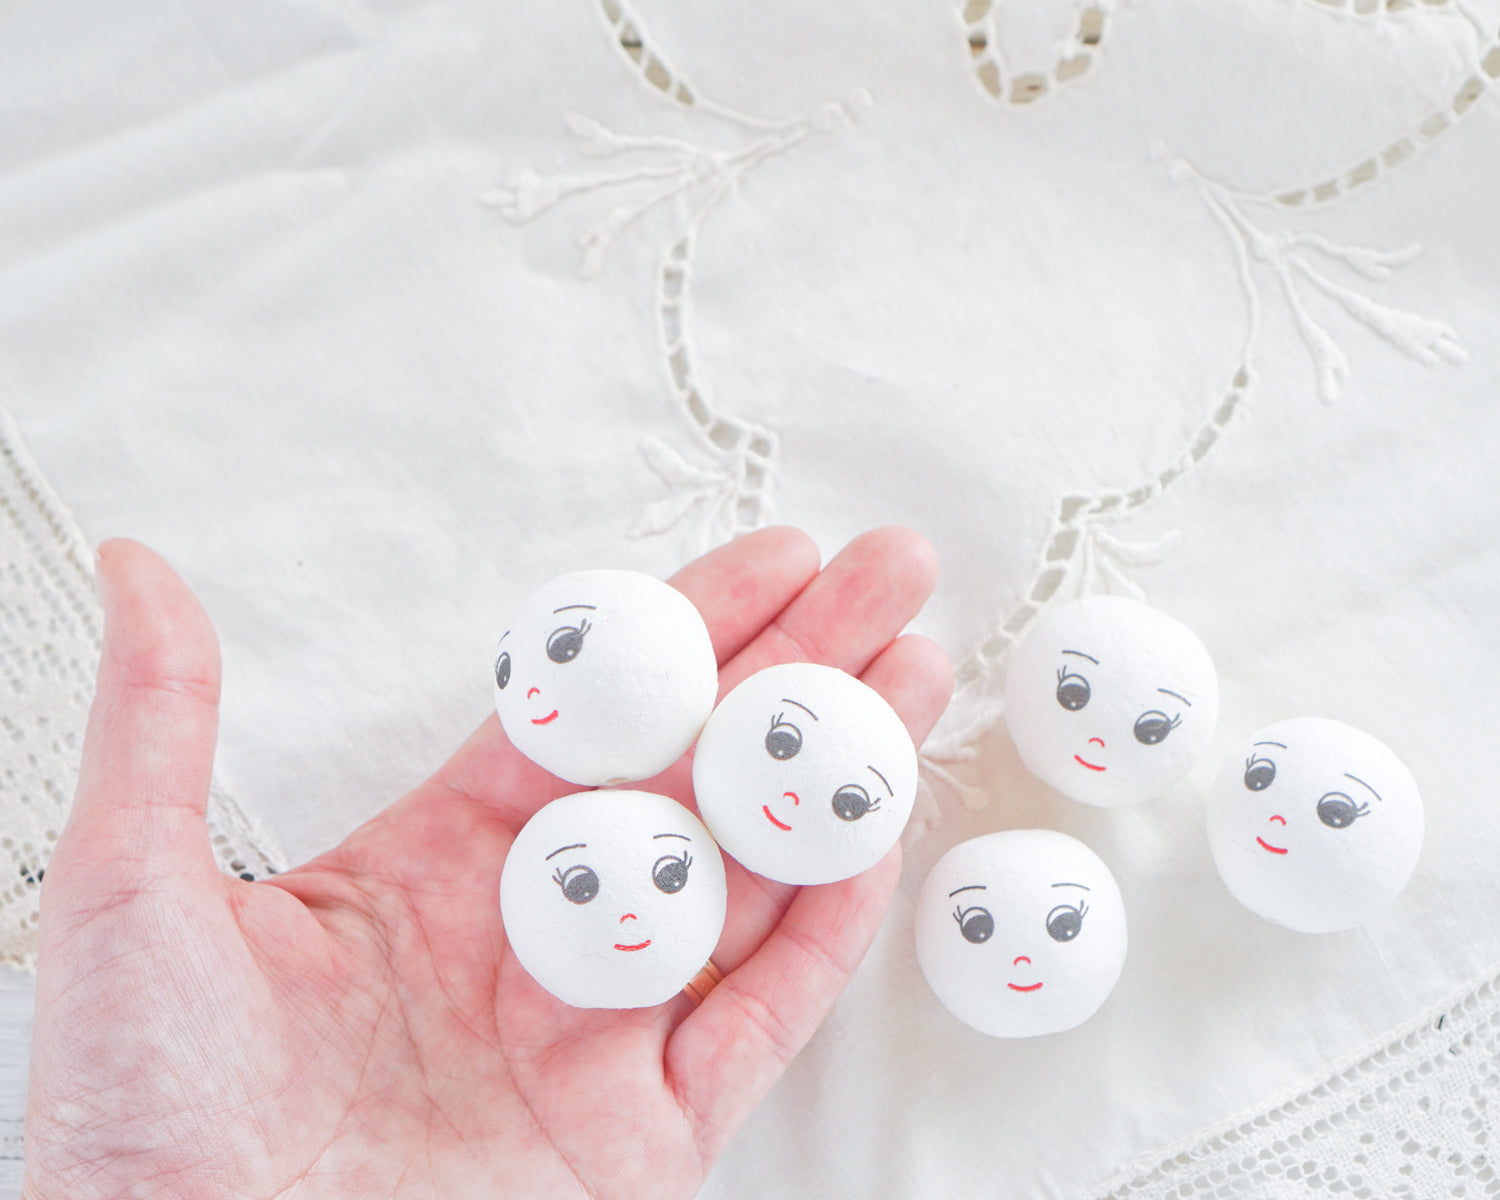 Spun Cotton Heads: DREAMER - 30mm White Doll Heads with Faces, 12 Pcs.